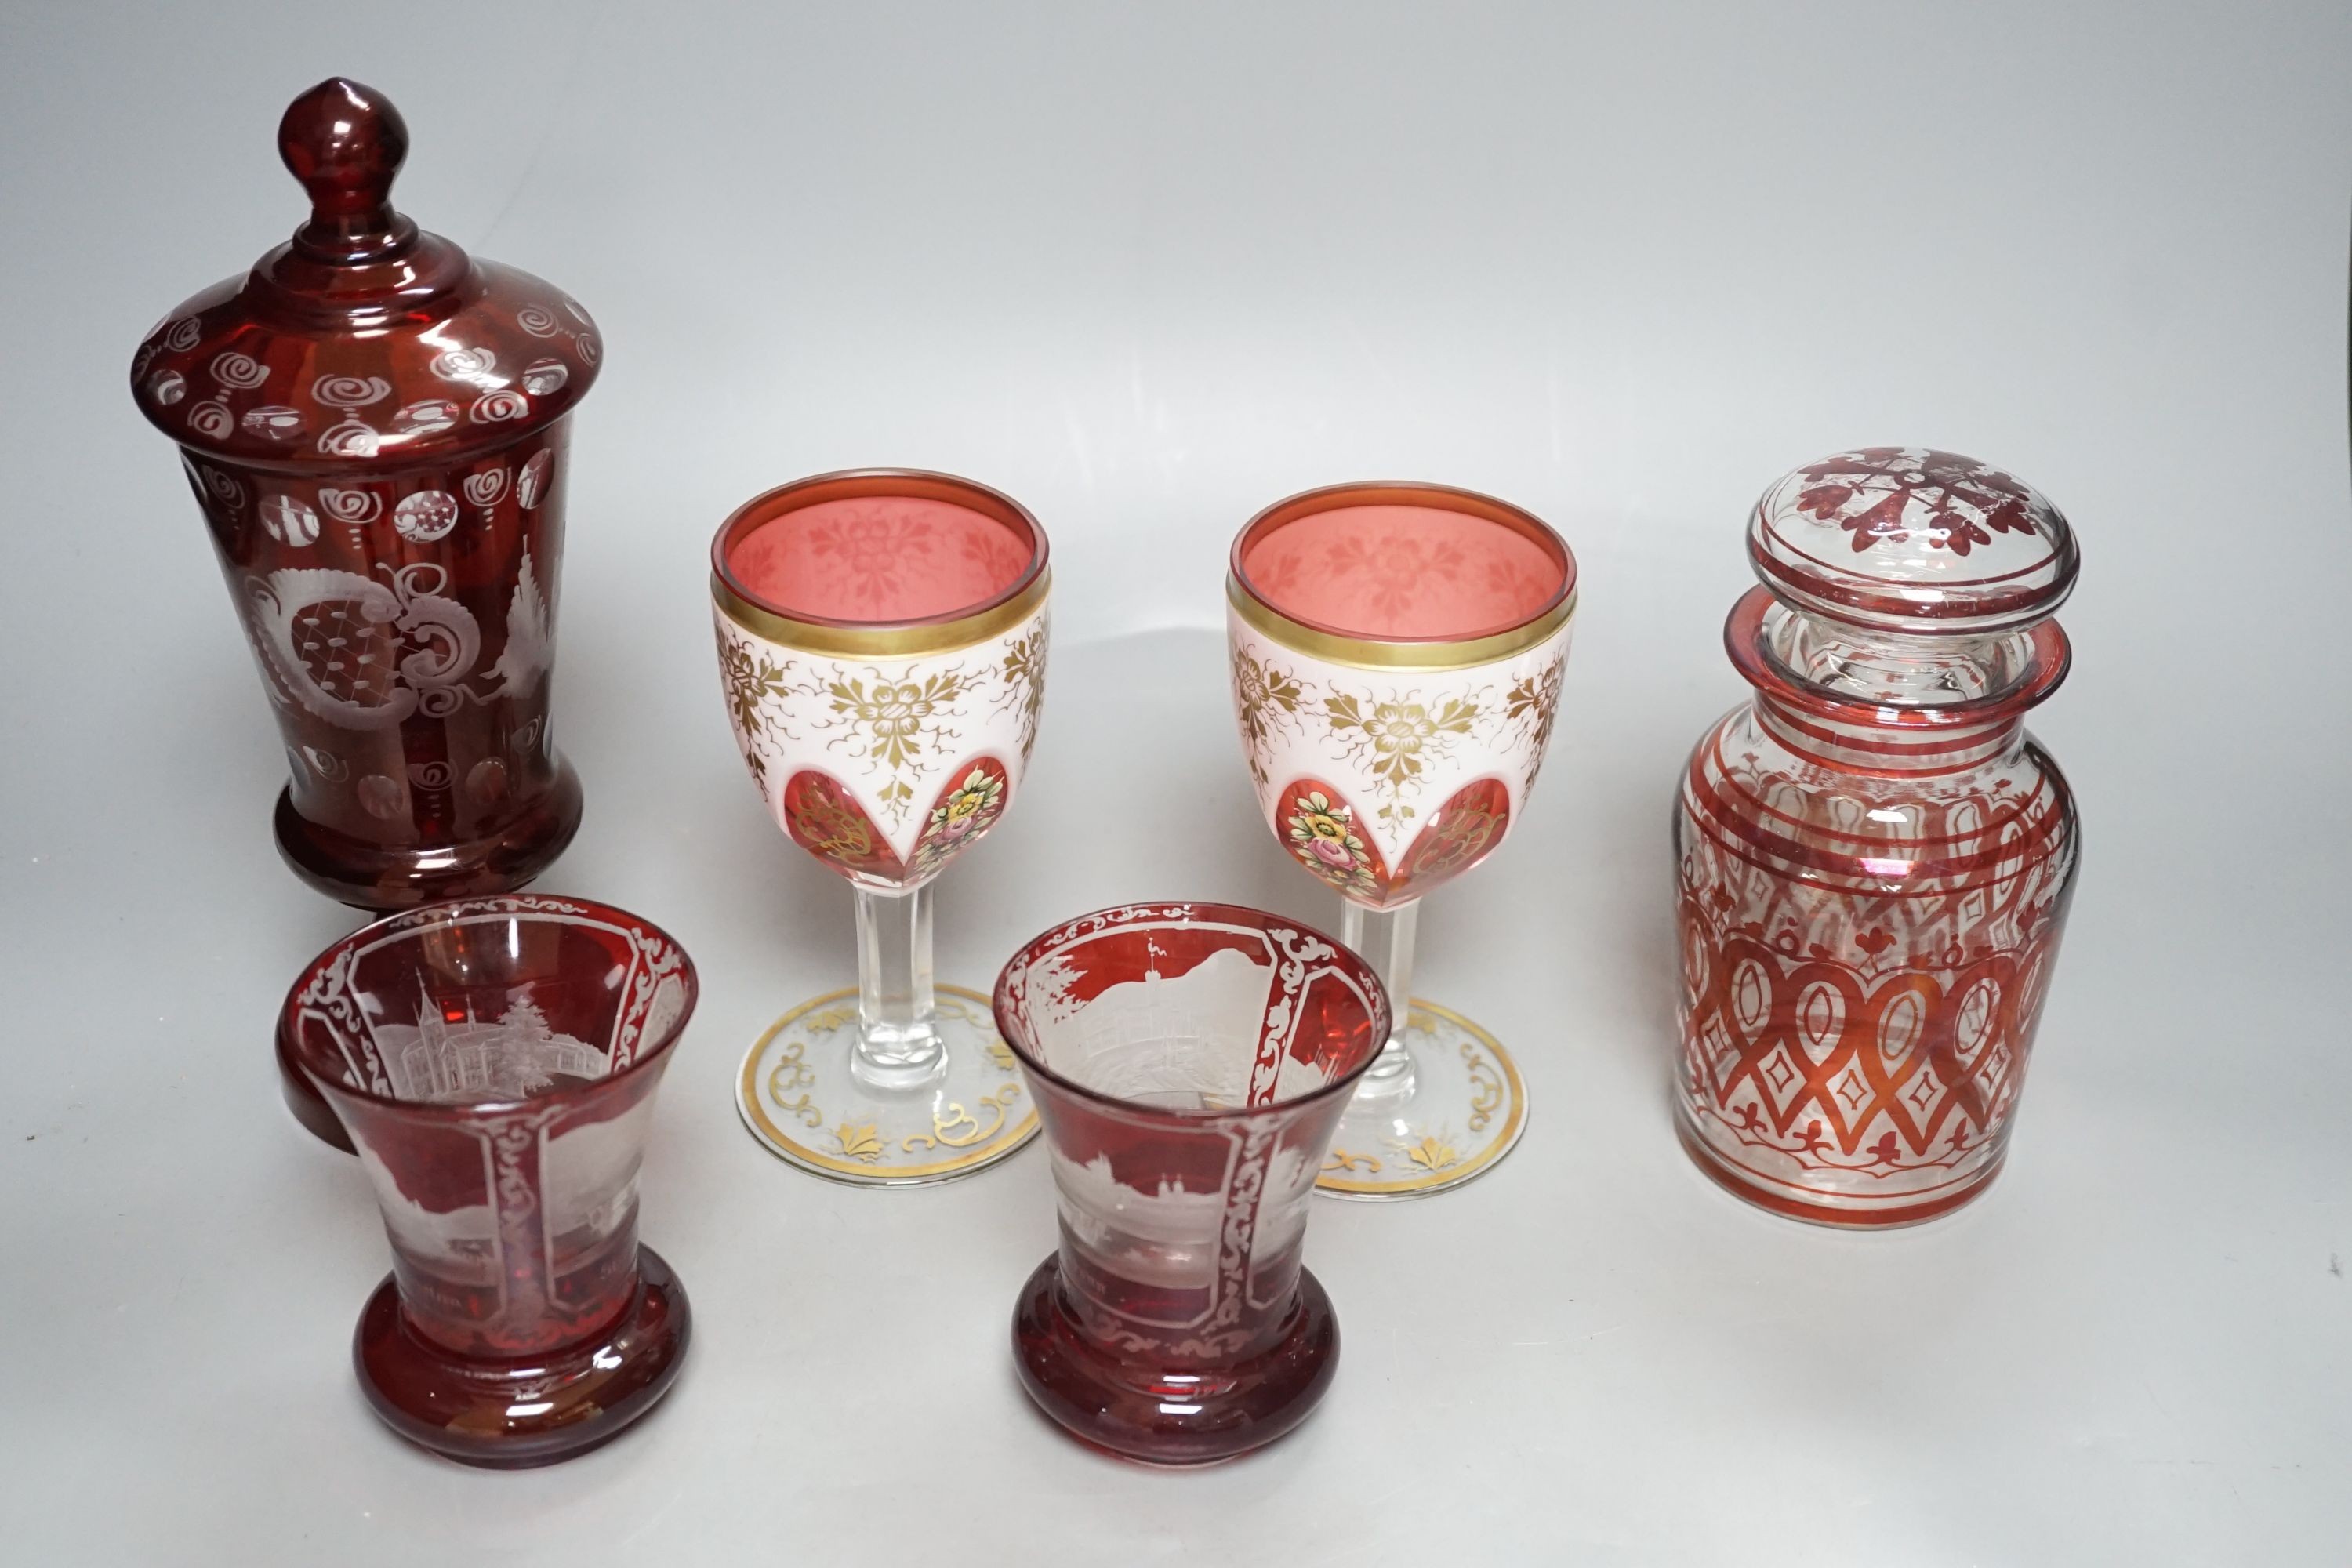 A pair of 19th century Bohemian ruby overlaid wine glasses, possibly Moser and other bohemian ruby glasswares